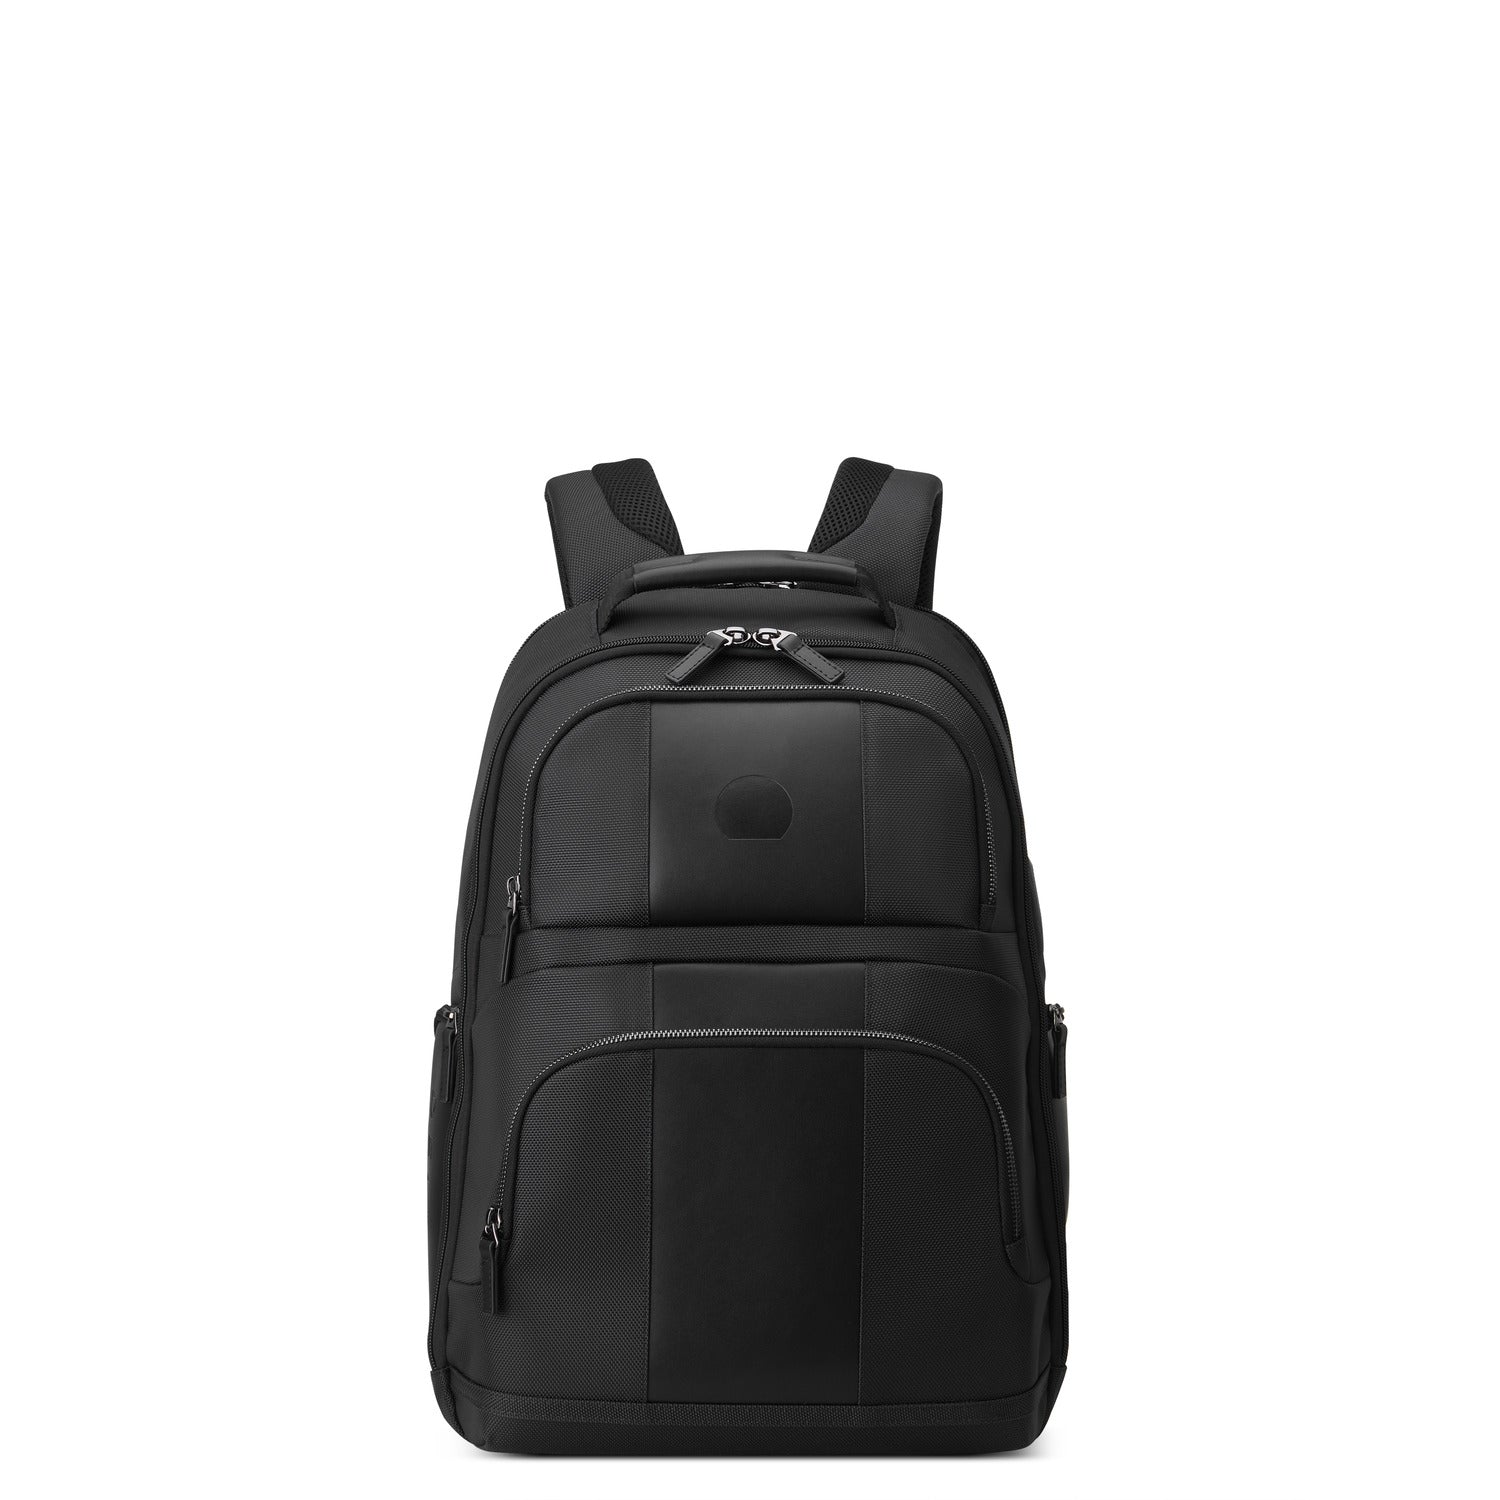 Delsey Wagram Compartment Backpack Laptop  15.6 inch  Black - 00119961000